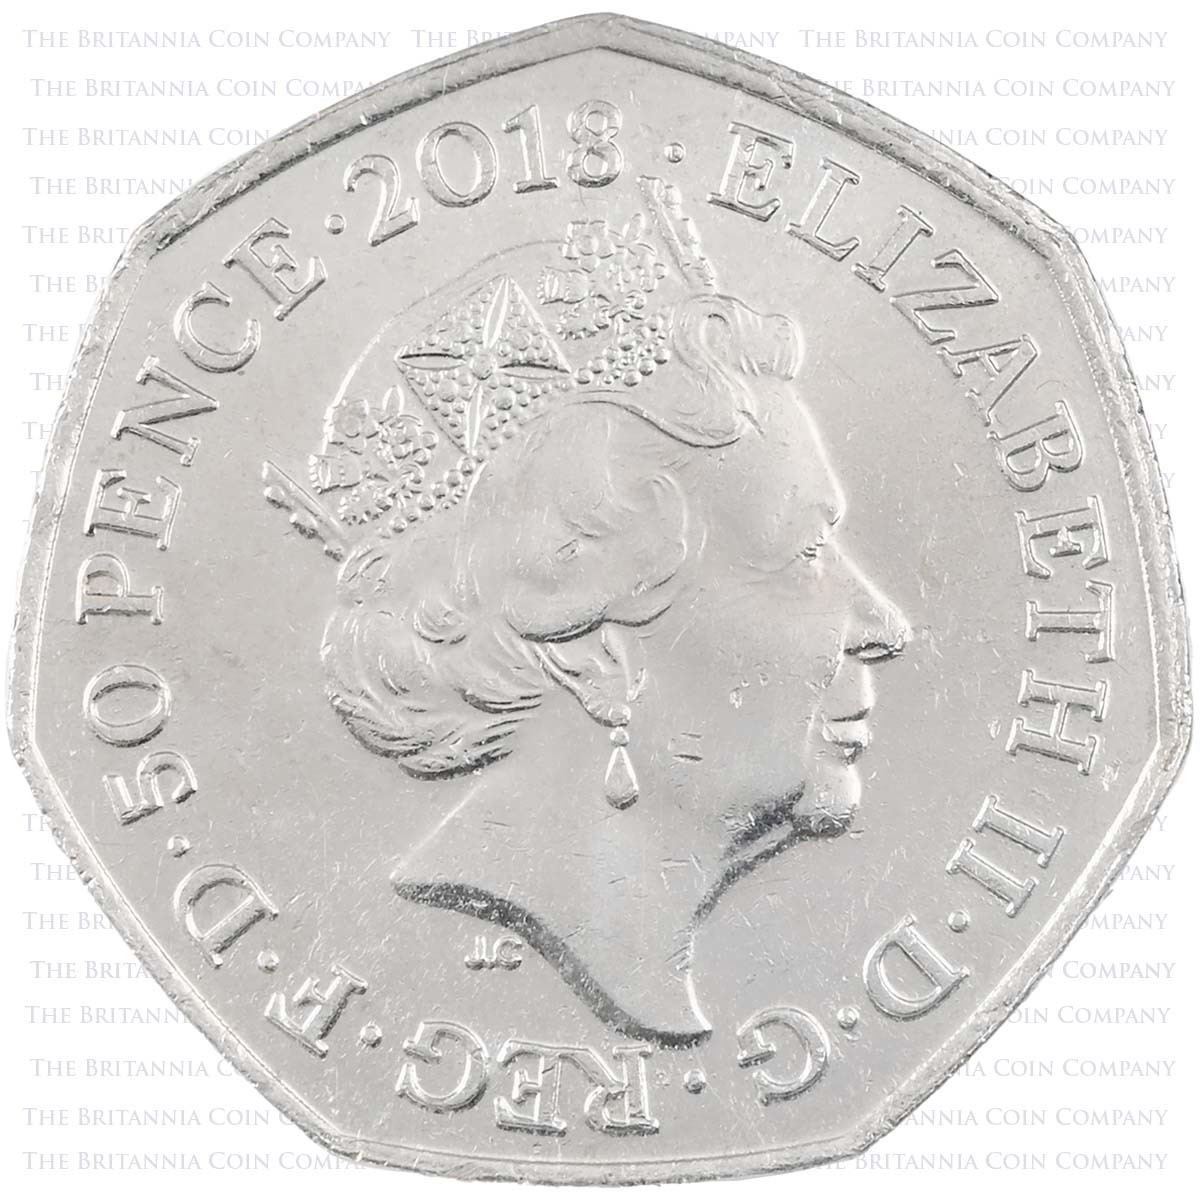 2018 Beatrix Potter Peter Rabbit Circulated Fifty Pence Coin Obverse